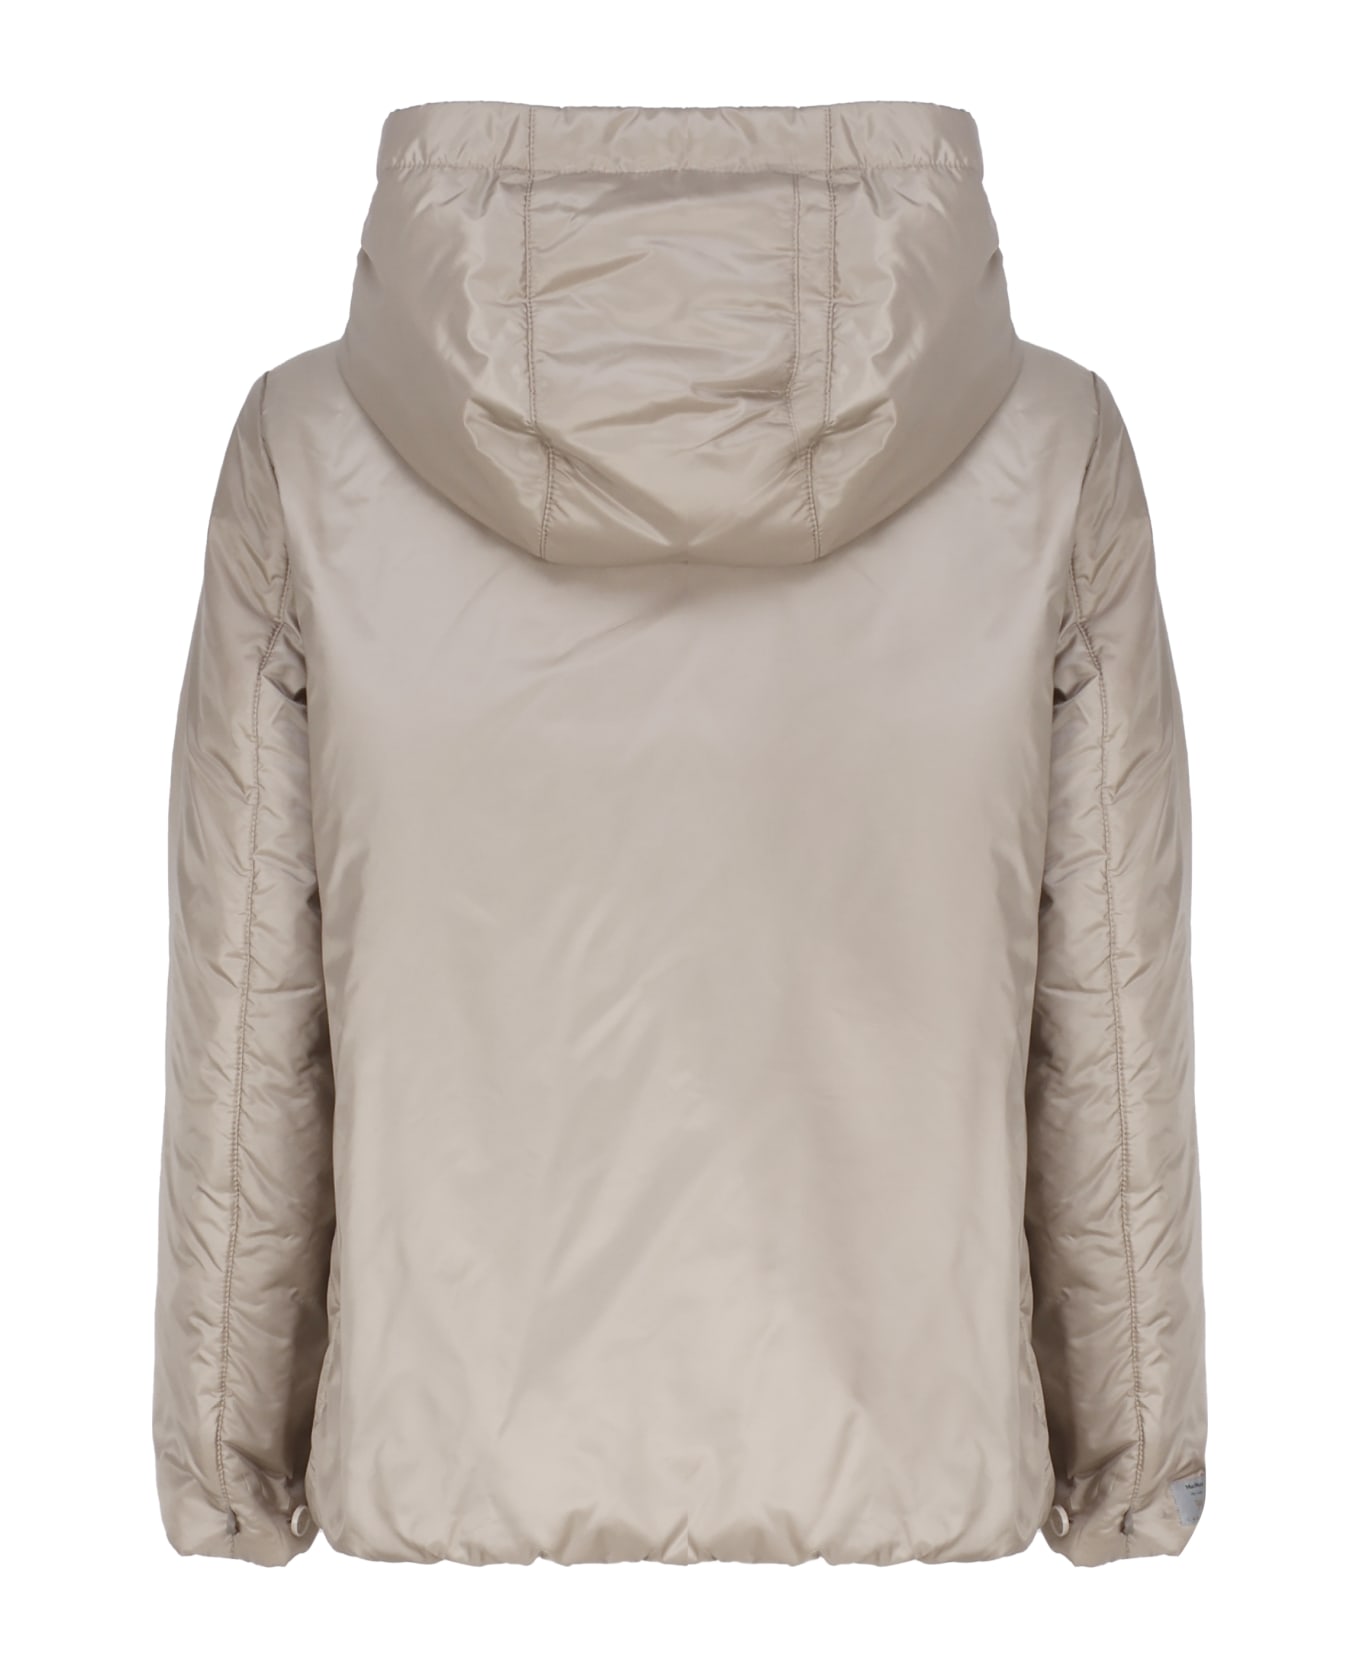 Max Mara The Cube Travel Jacket In Drip-proof Technical Canvas - Beige